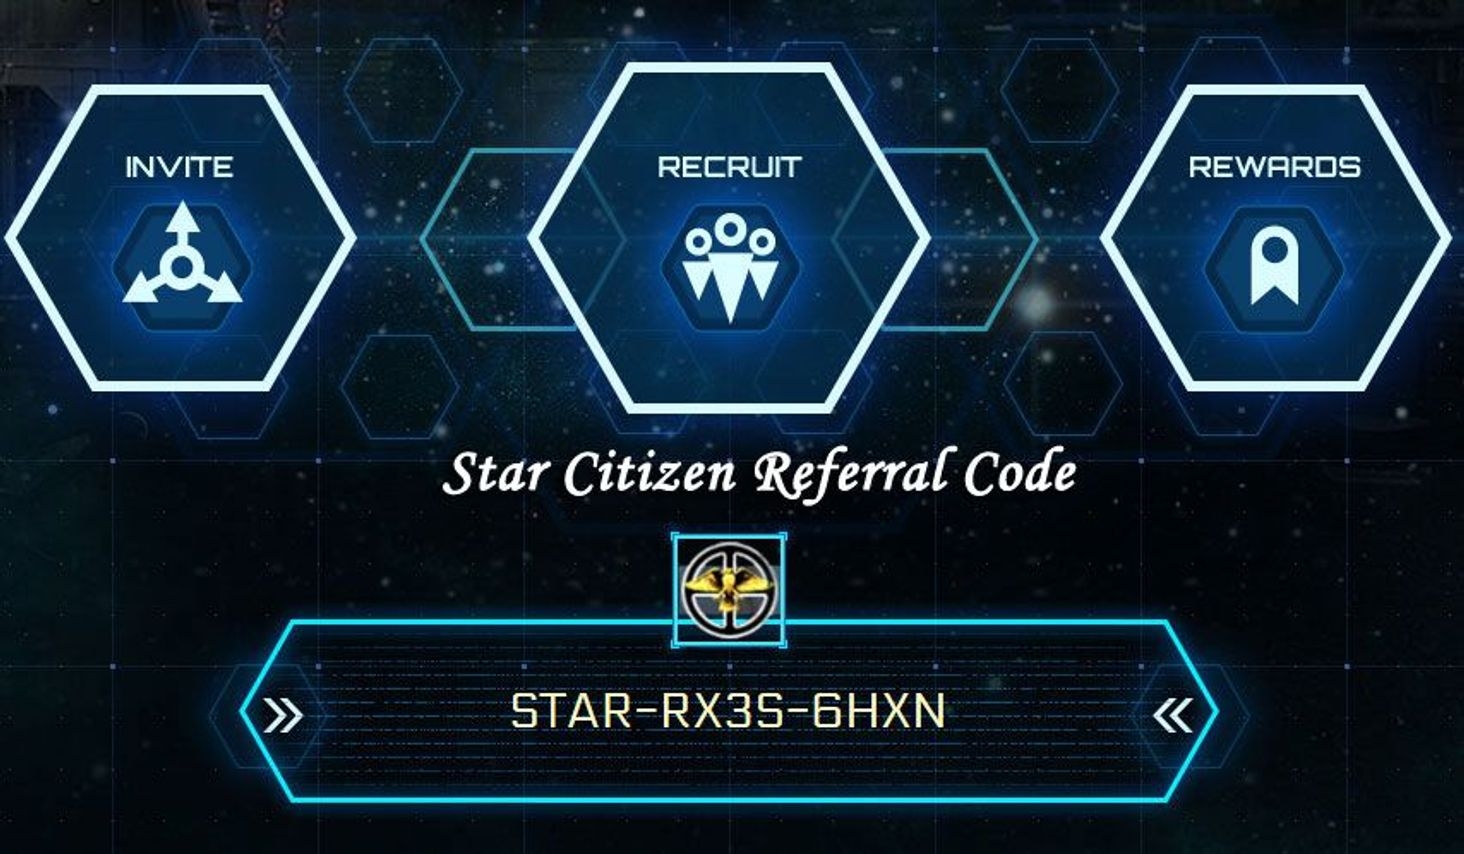 Star Citizen Referral Code: STAR-RX3S-6HXN

Anyone registering with my personal code will automatically get 5,000 UEC to spend in Voyager Direct, so if you are signing up to star citizen make sure to plug it in, this also helps me out!